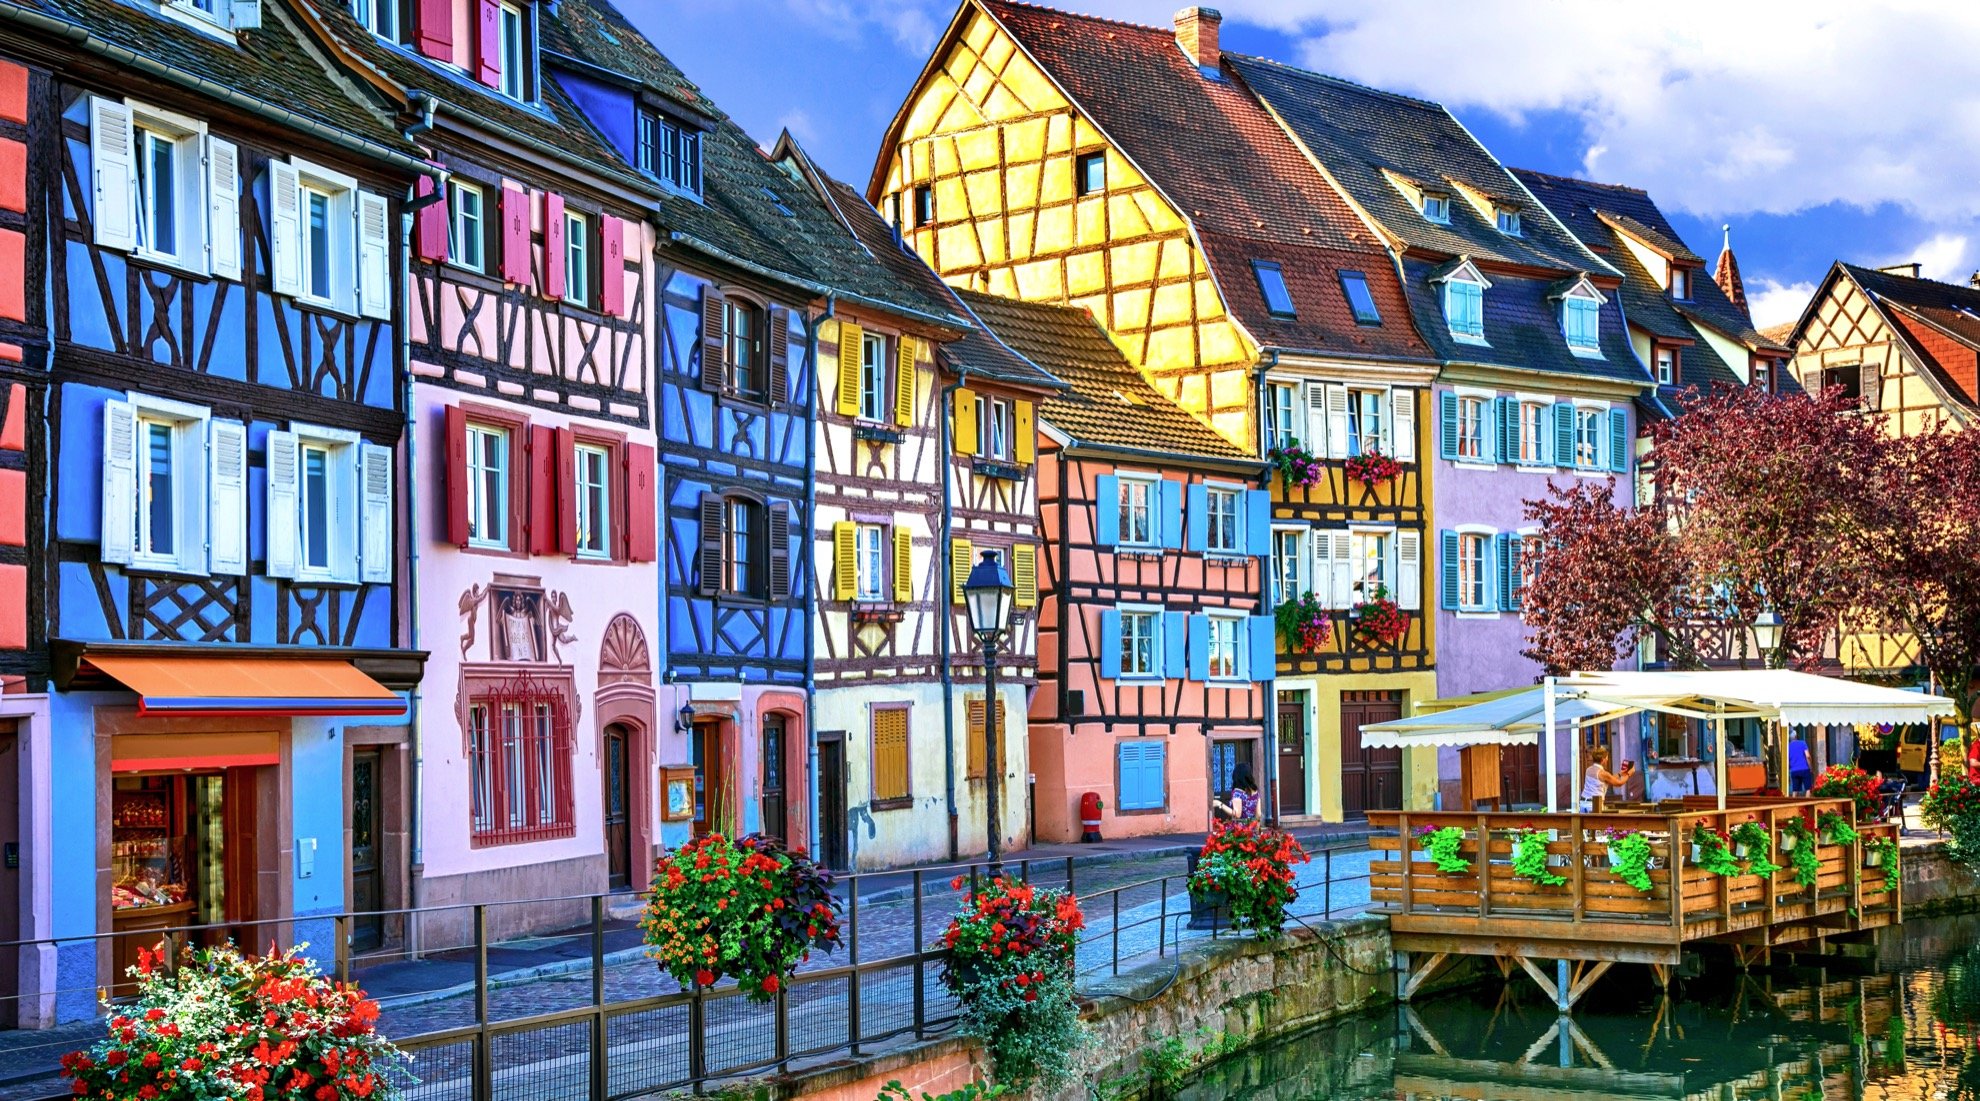 Discover The Colorful Village of Colmar, France